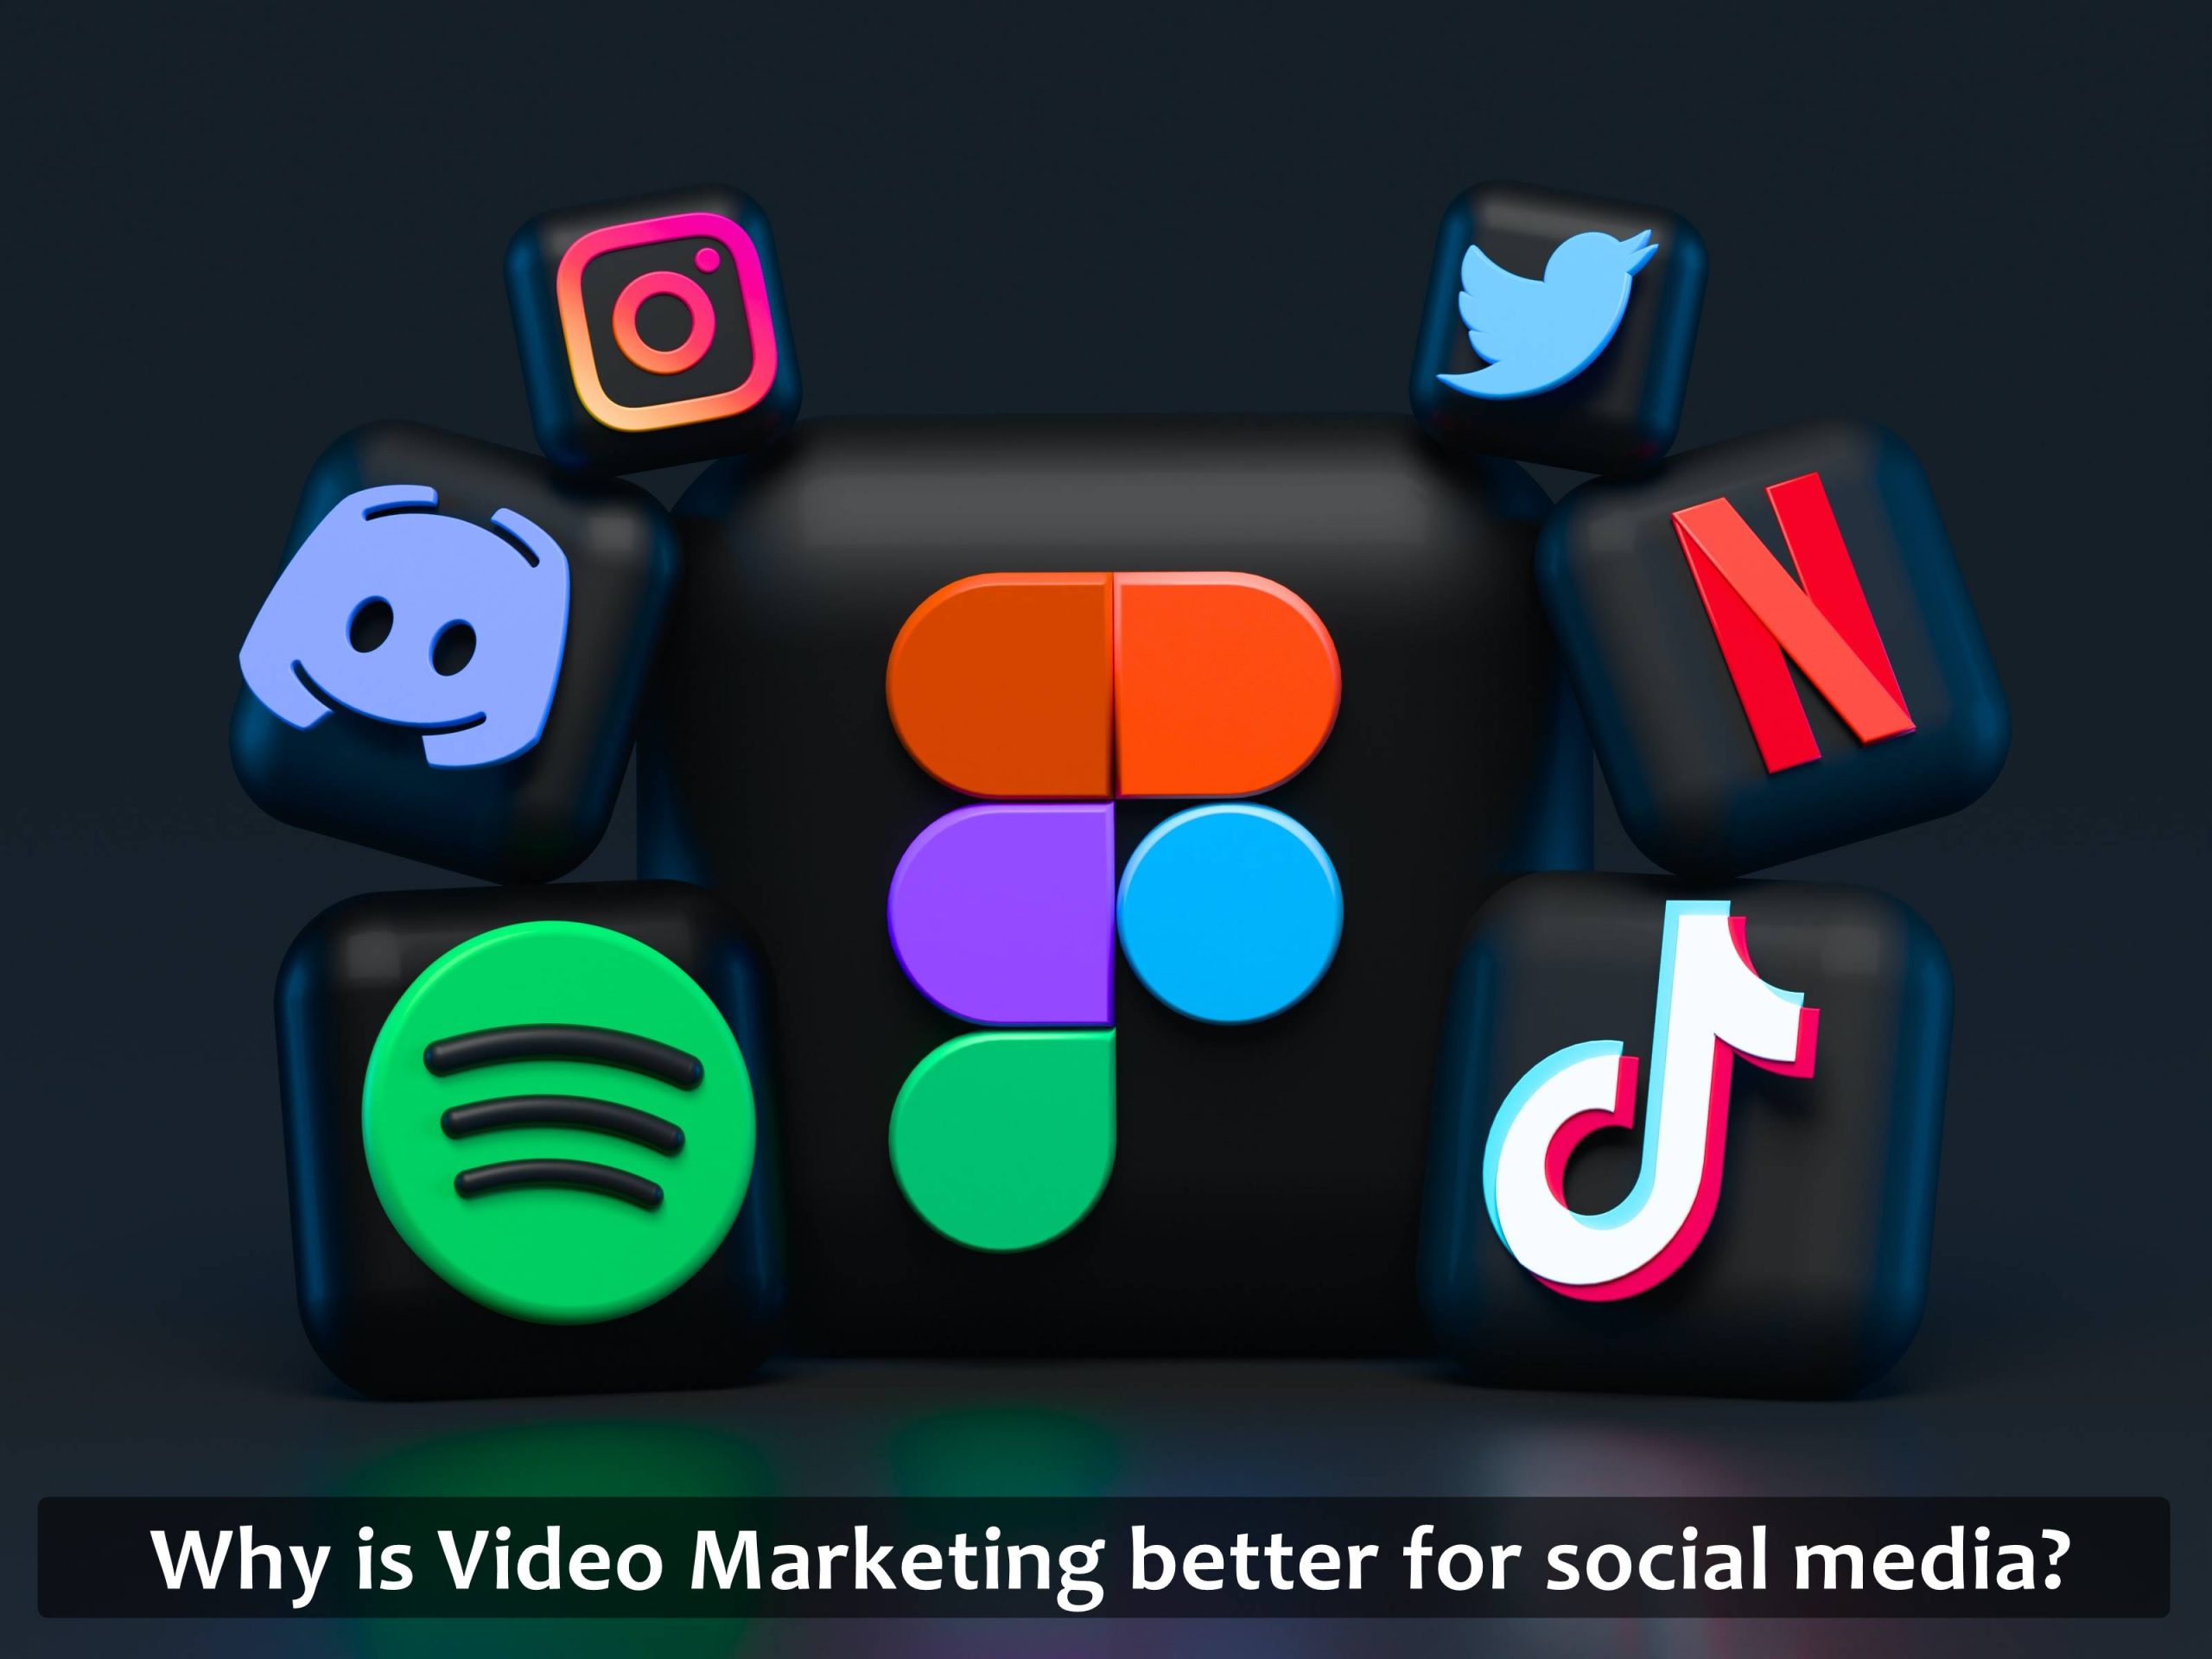 Why is Video Marketing better for social media?